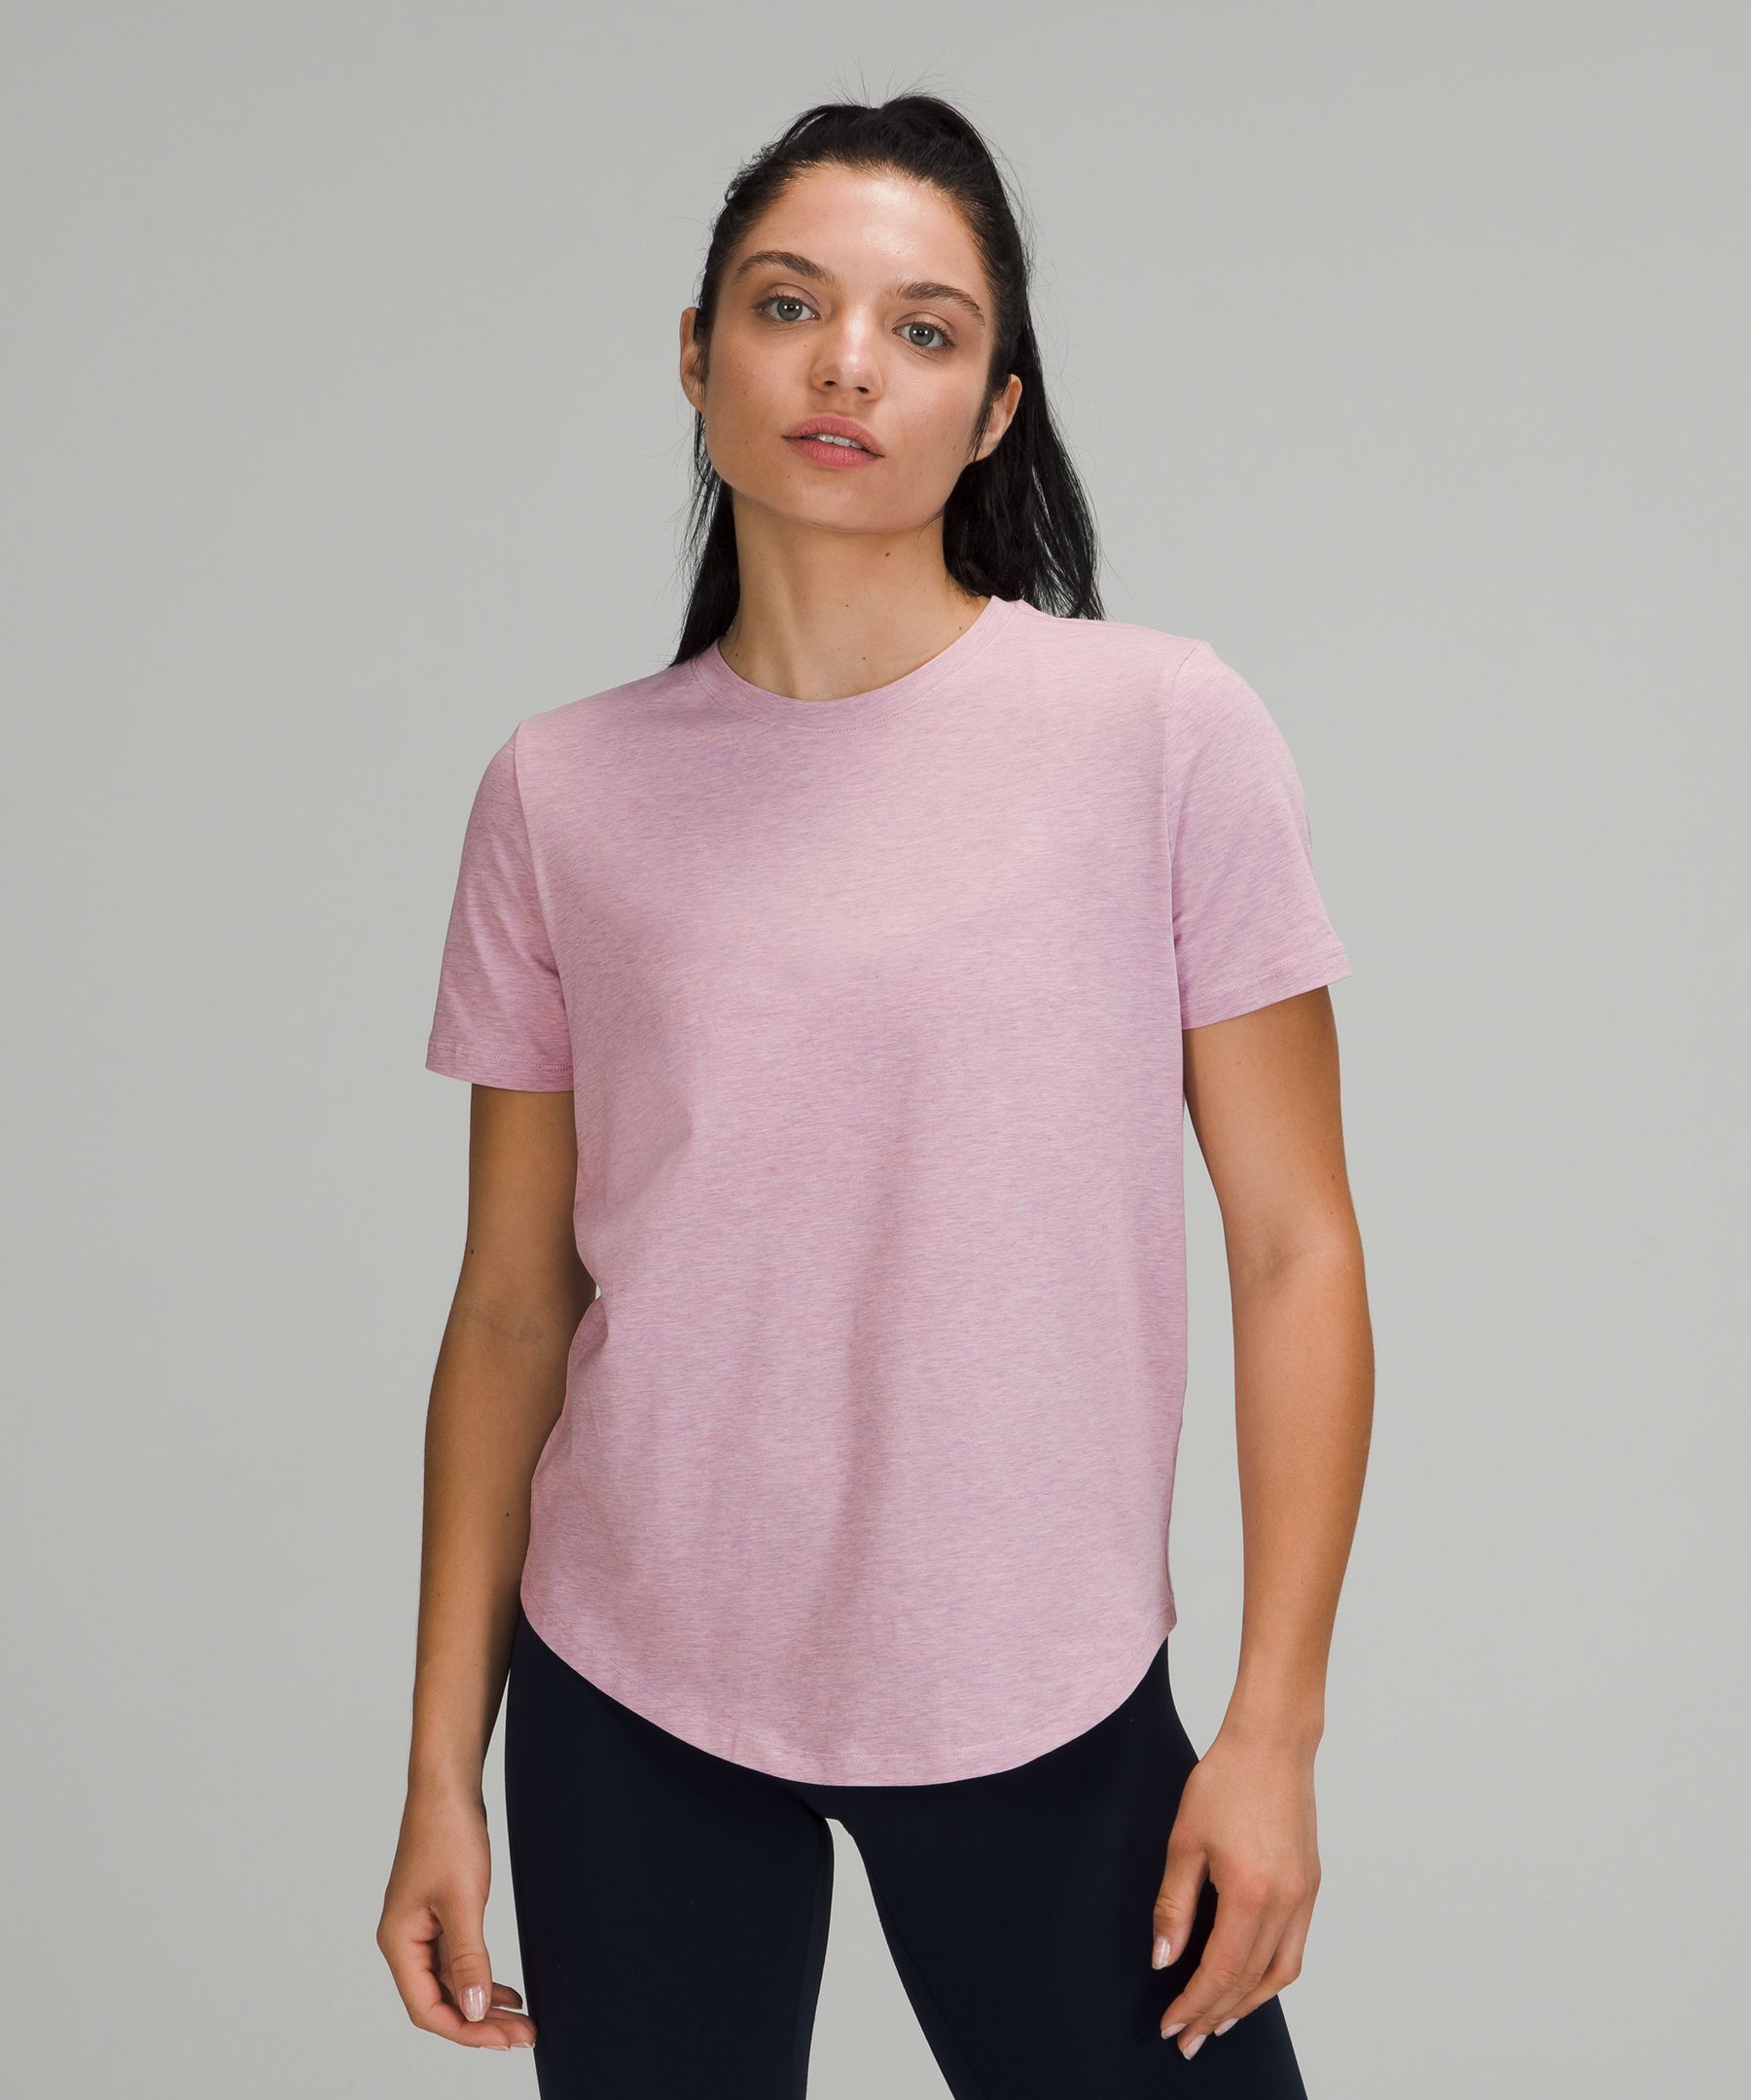 Lululemon Love Crew Short Sleeve T-shirt In Heathered Pink Taupe